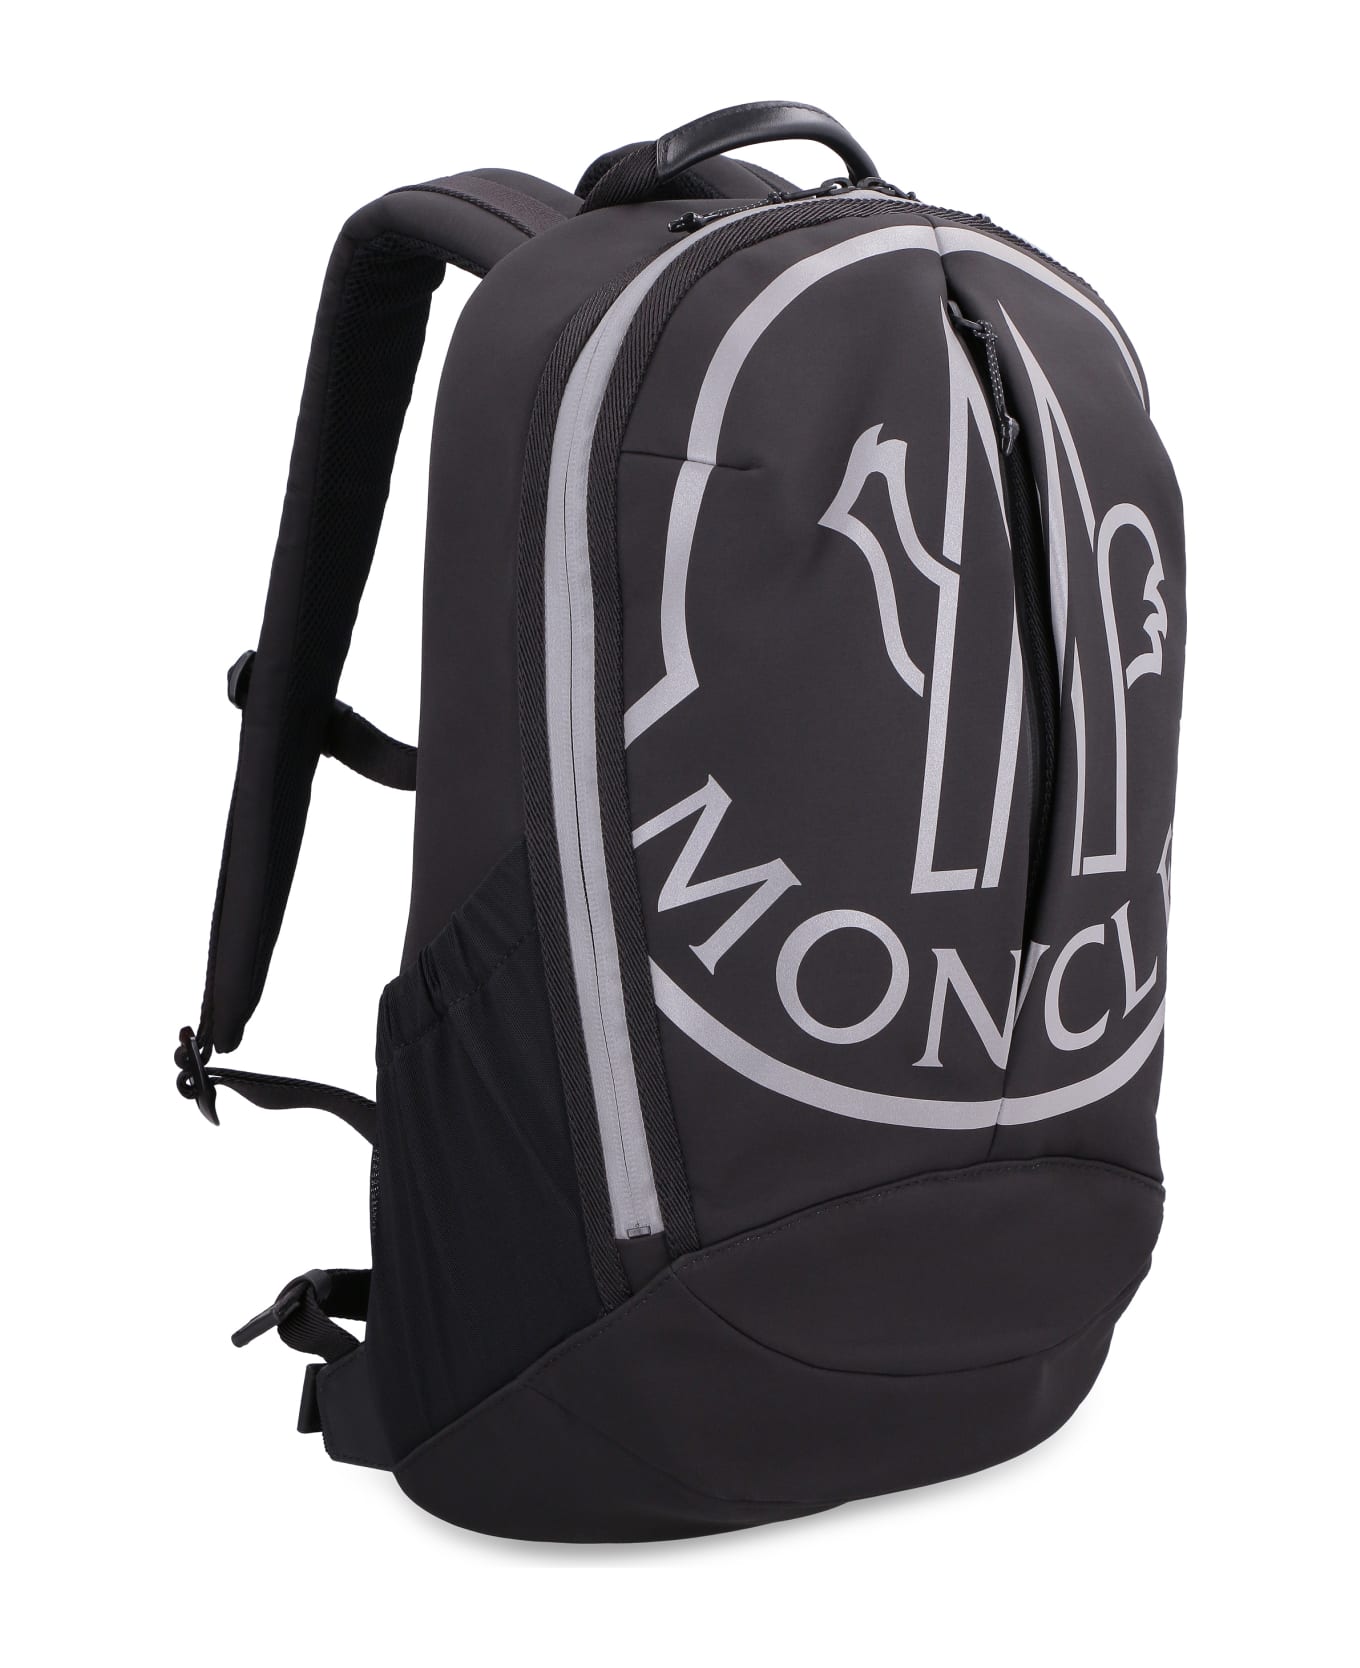 Moncler Cut Technical Fabric Backpack With Logo - BLACK